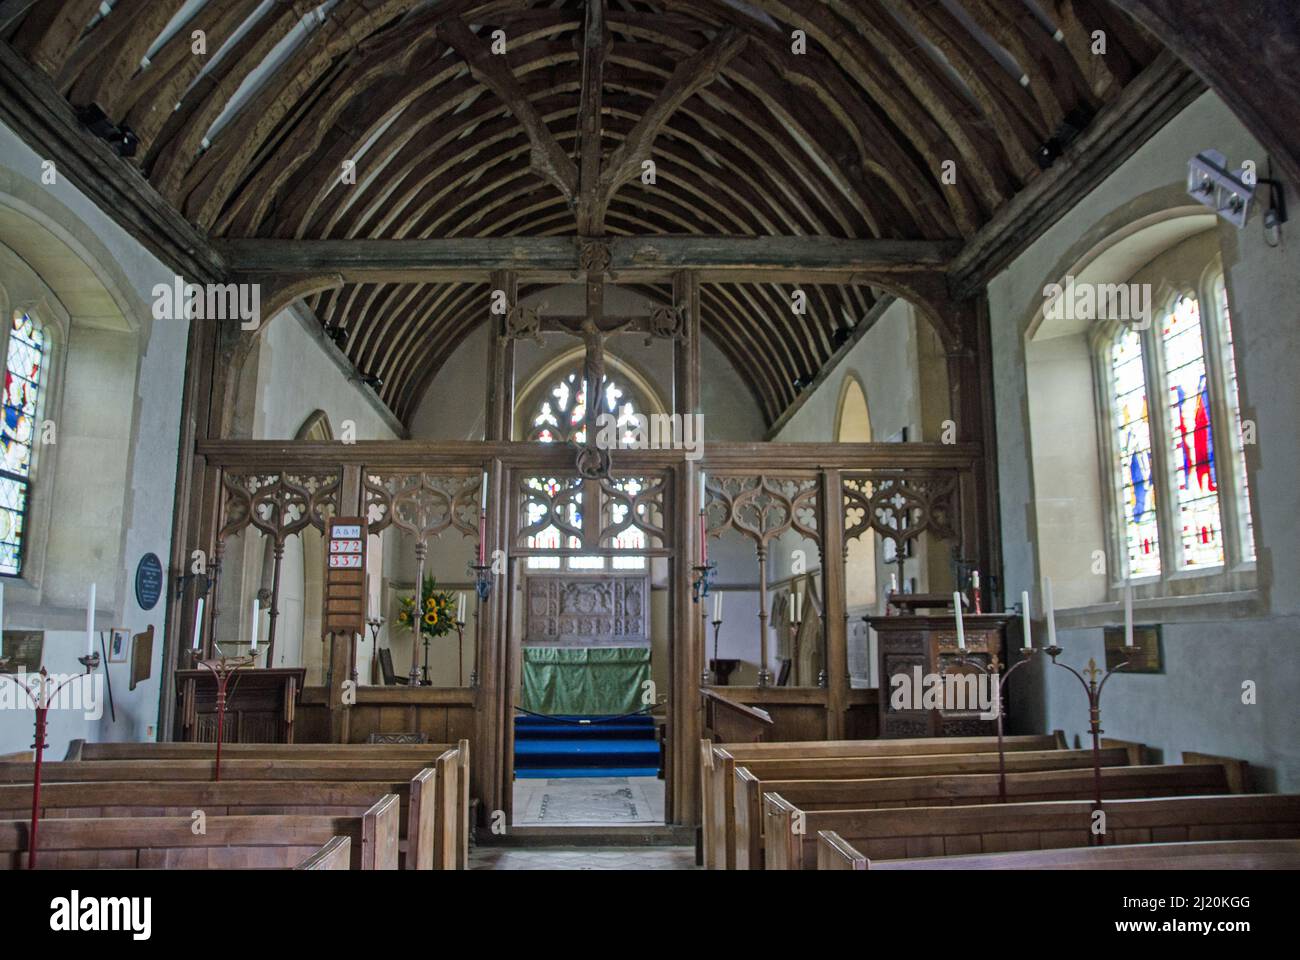 Interior of the historic St Mary's church in the Hampshire village of Hartley Wespall.  The wooden beams date to medieval times. Stock Photo